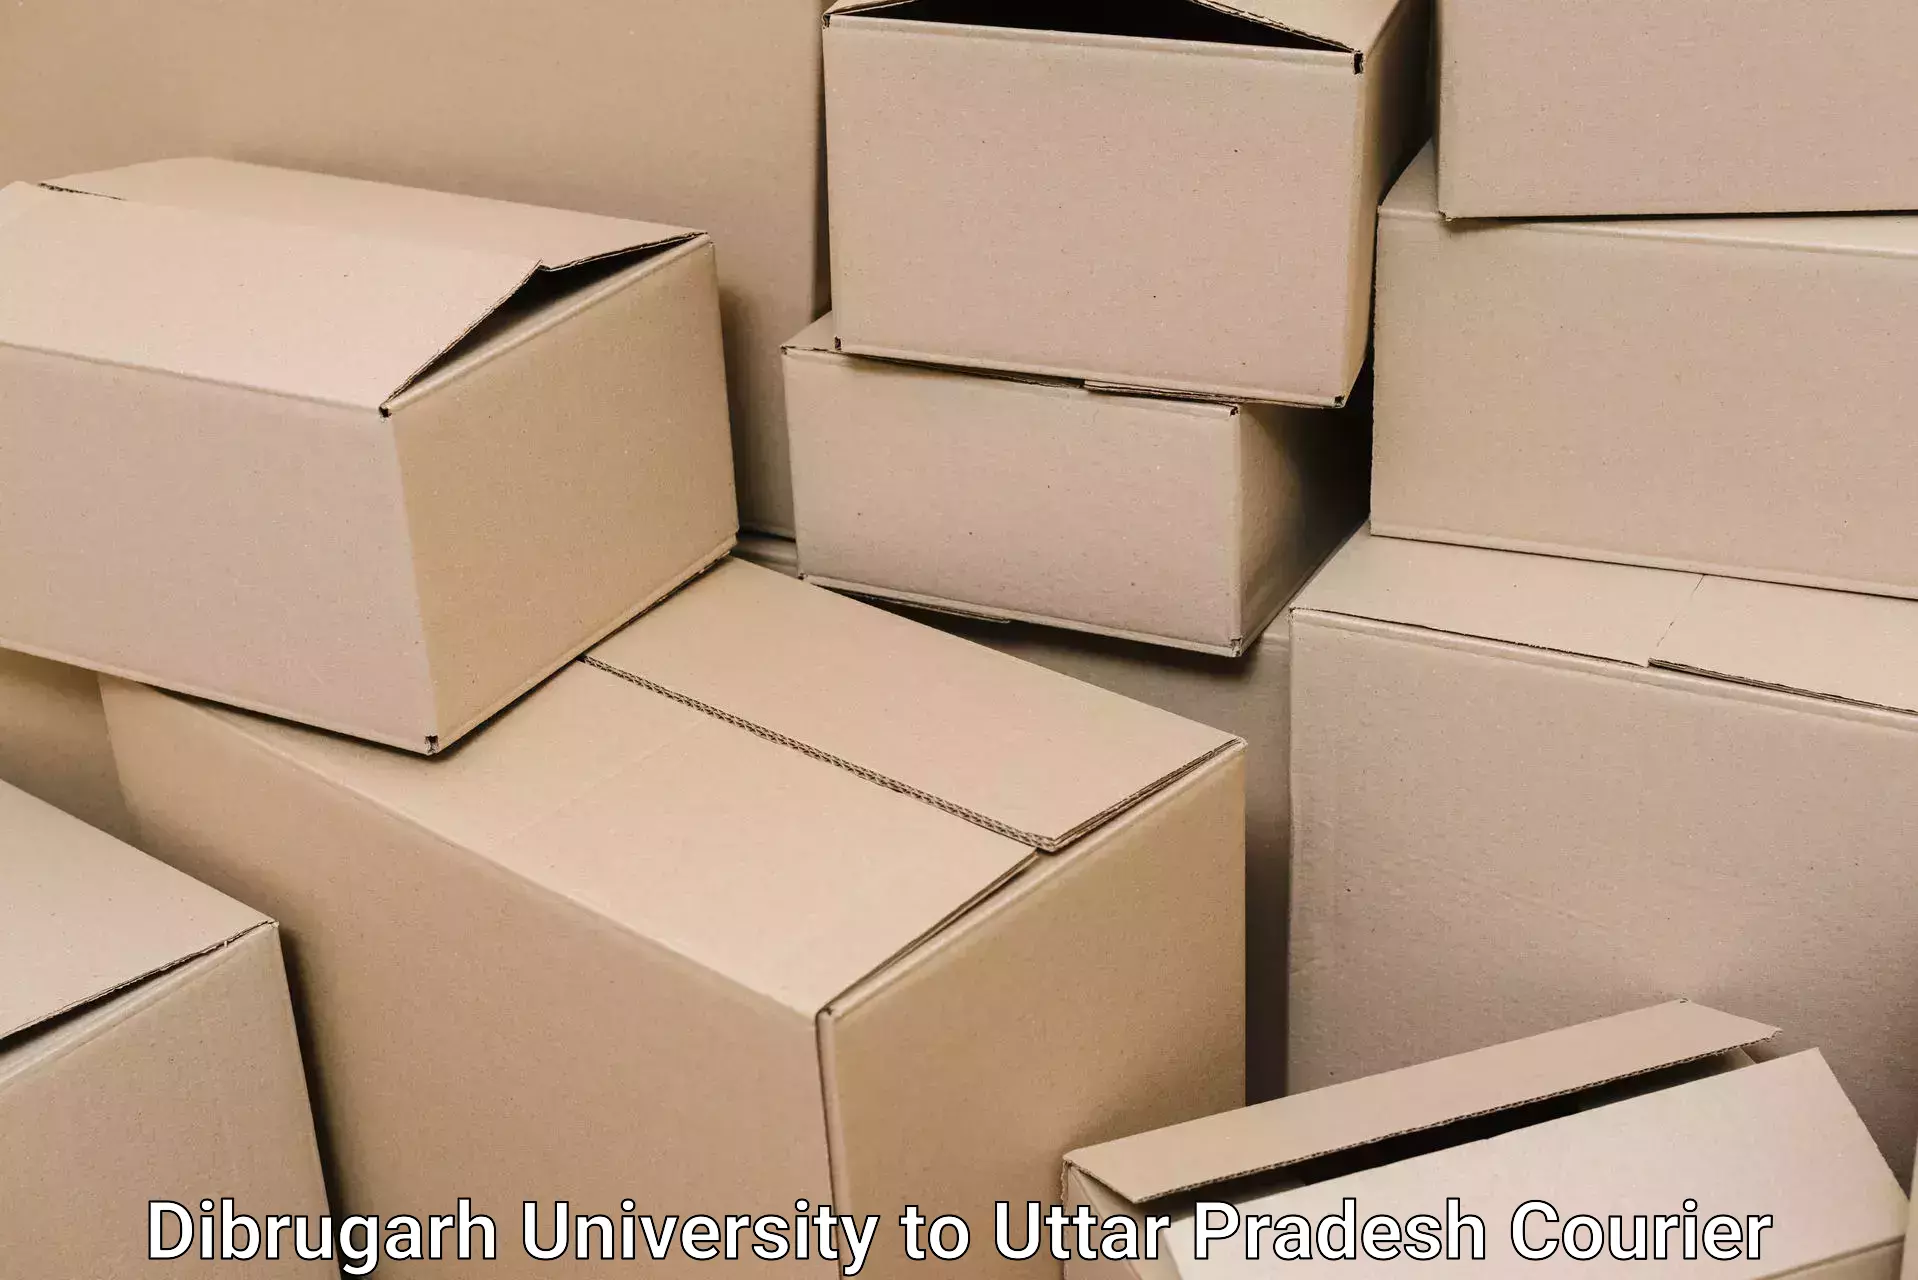 Quality moving and storage Dibrugarh University to Harpalpur